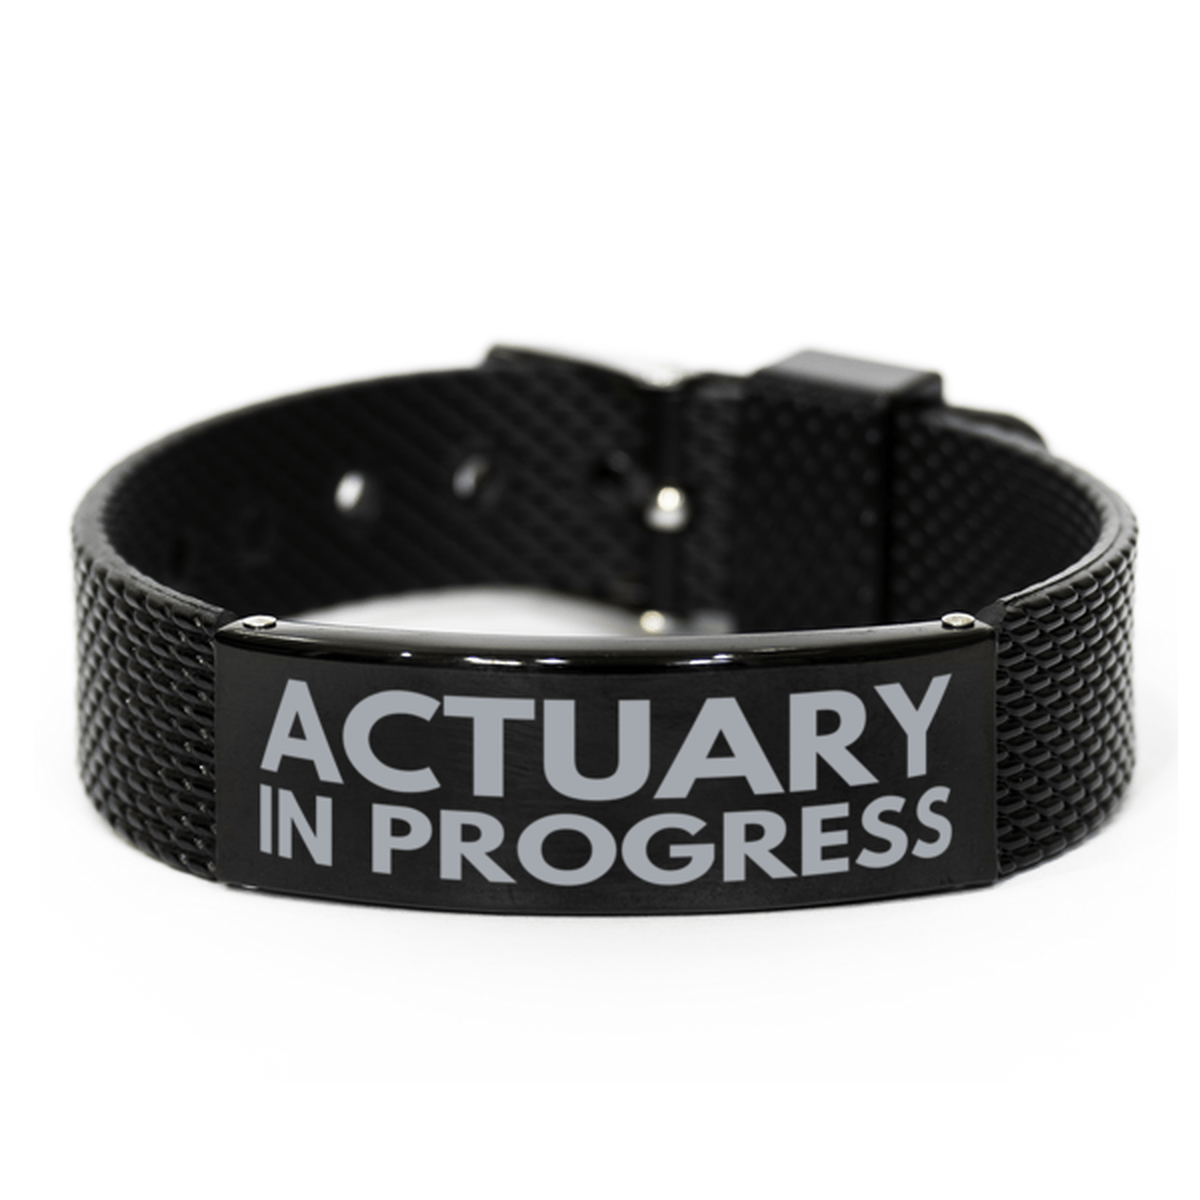 Inspirational Actuary Black Shark Mesh Bracelet, Actuary In Progress, Best Graduation Gifts for Students